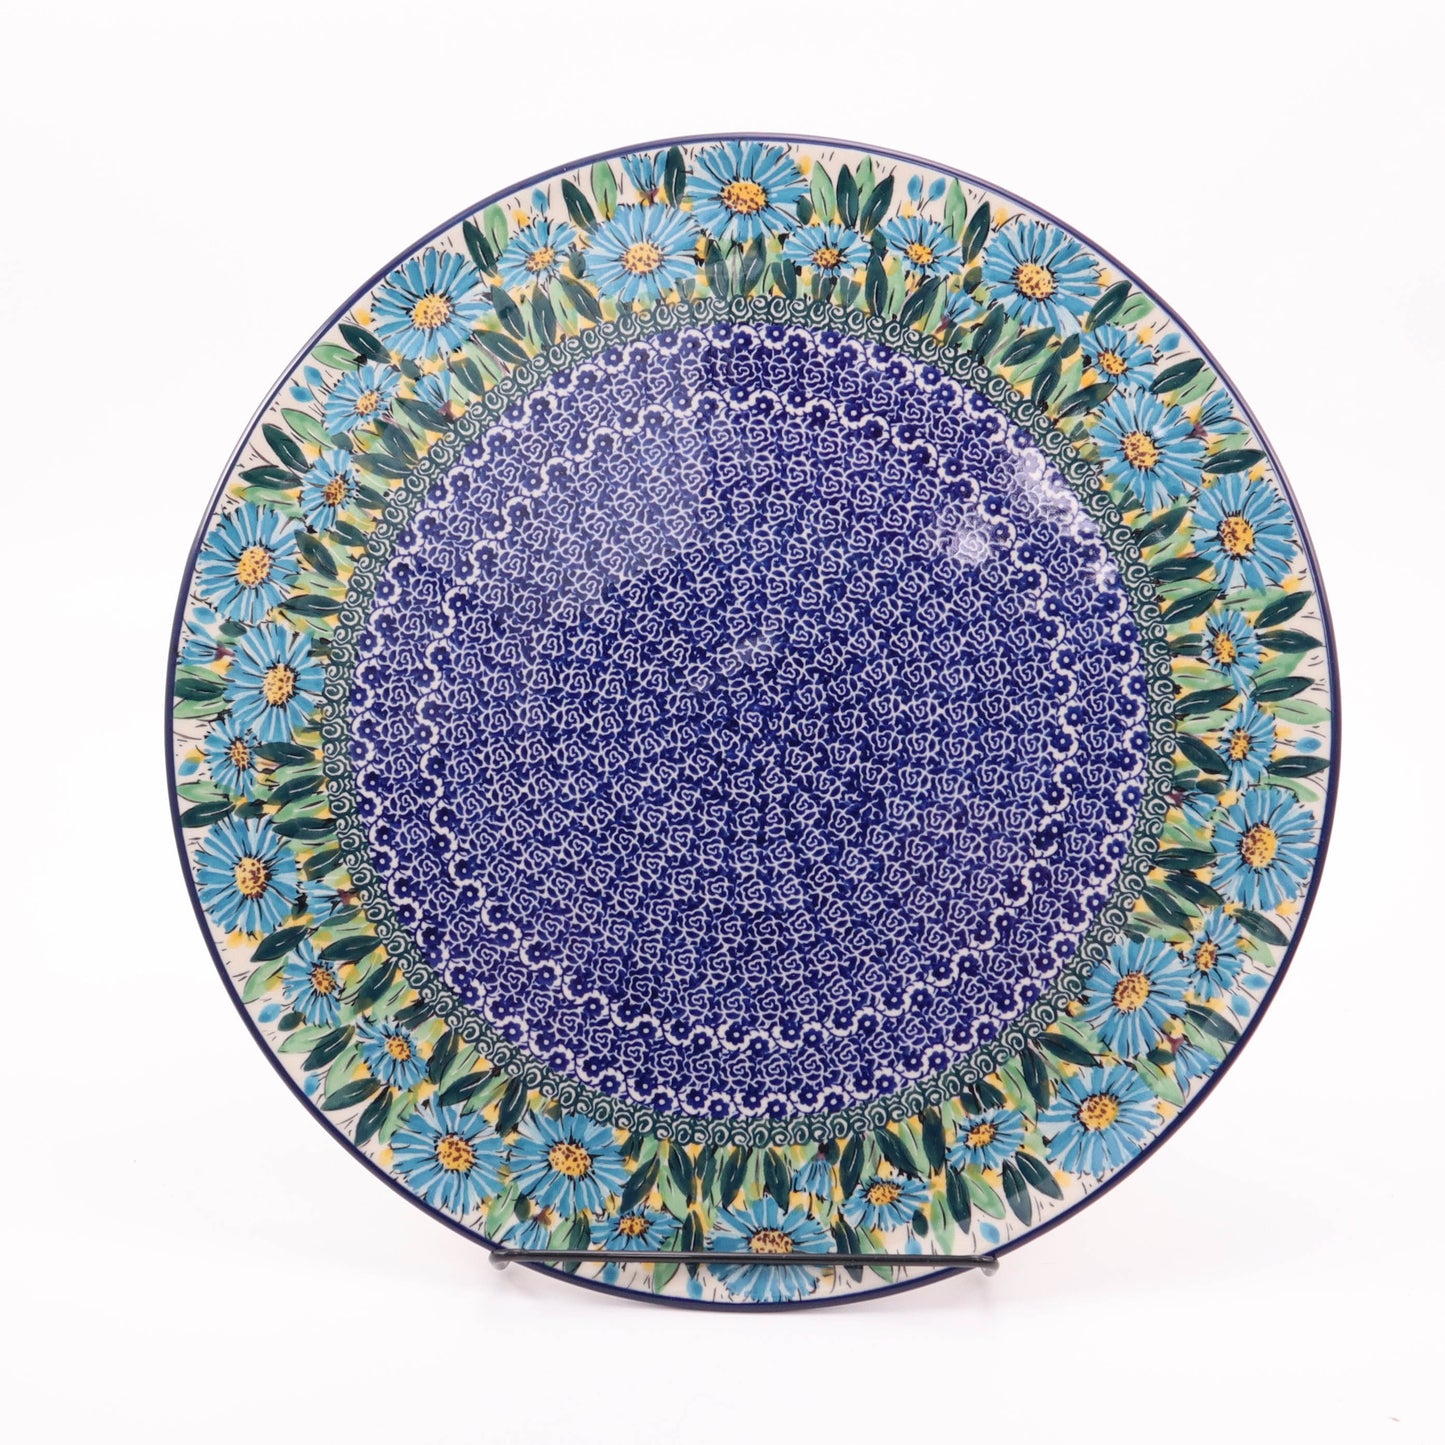 13" Pizza Plate. Pattern: Blue Aster